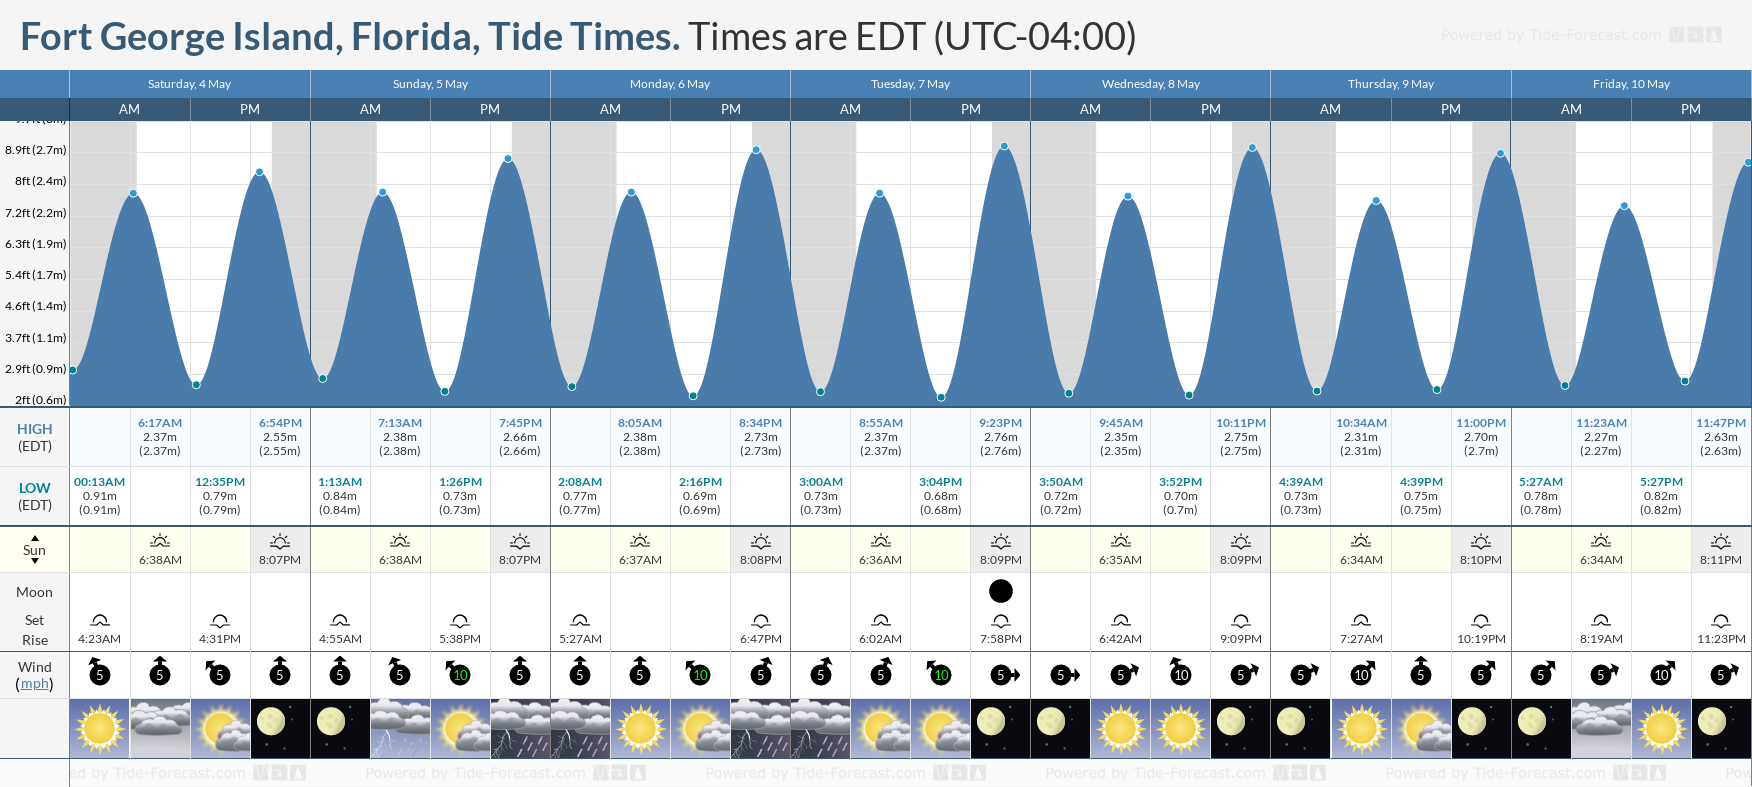 Fort George Island, Florida Tide Chart including high and low tide tide times for the next 7 days